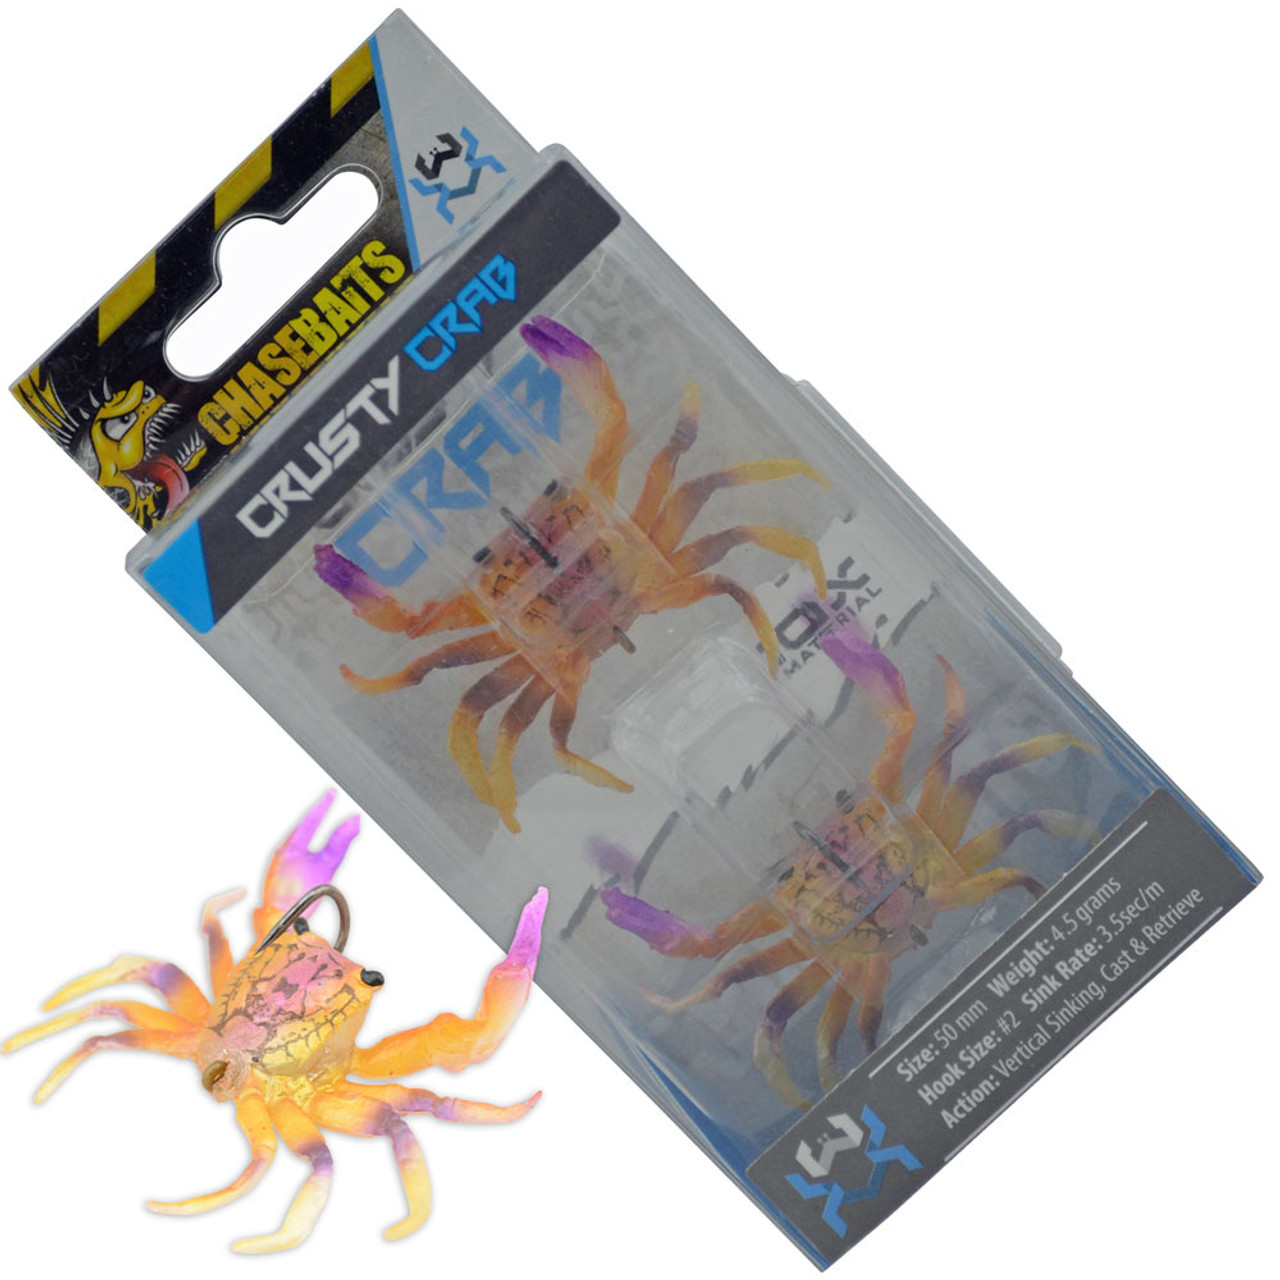 Chasebaits Crusty Crab Lures (Pack of 2)